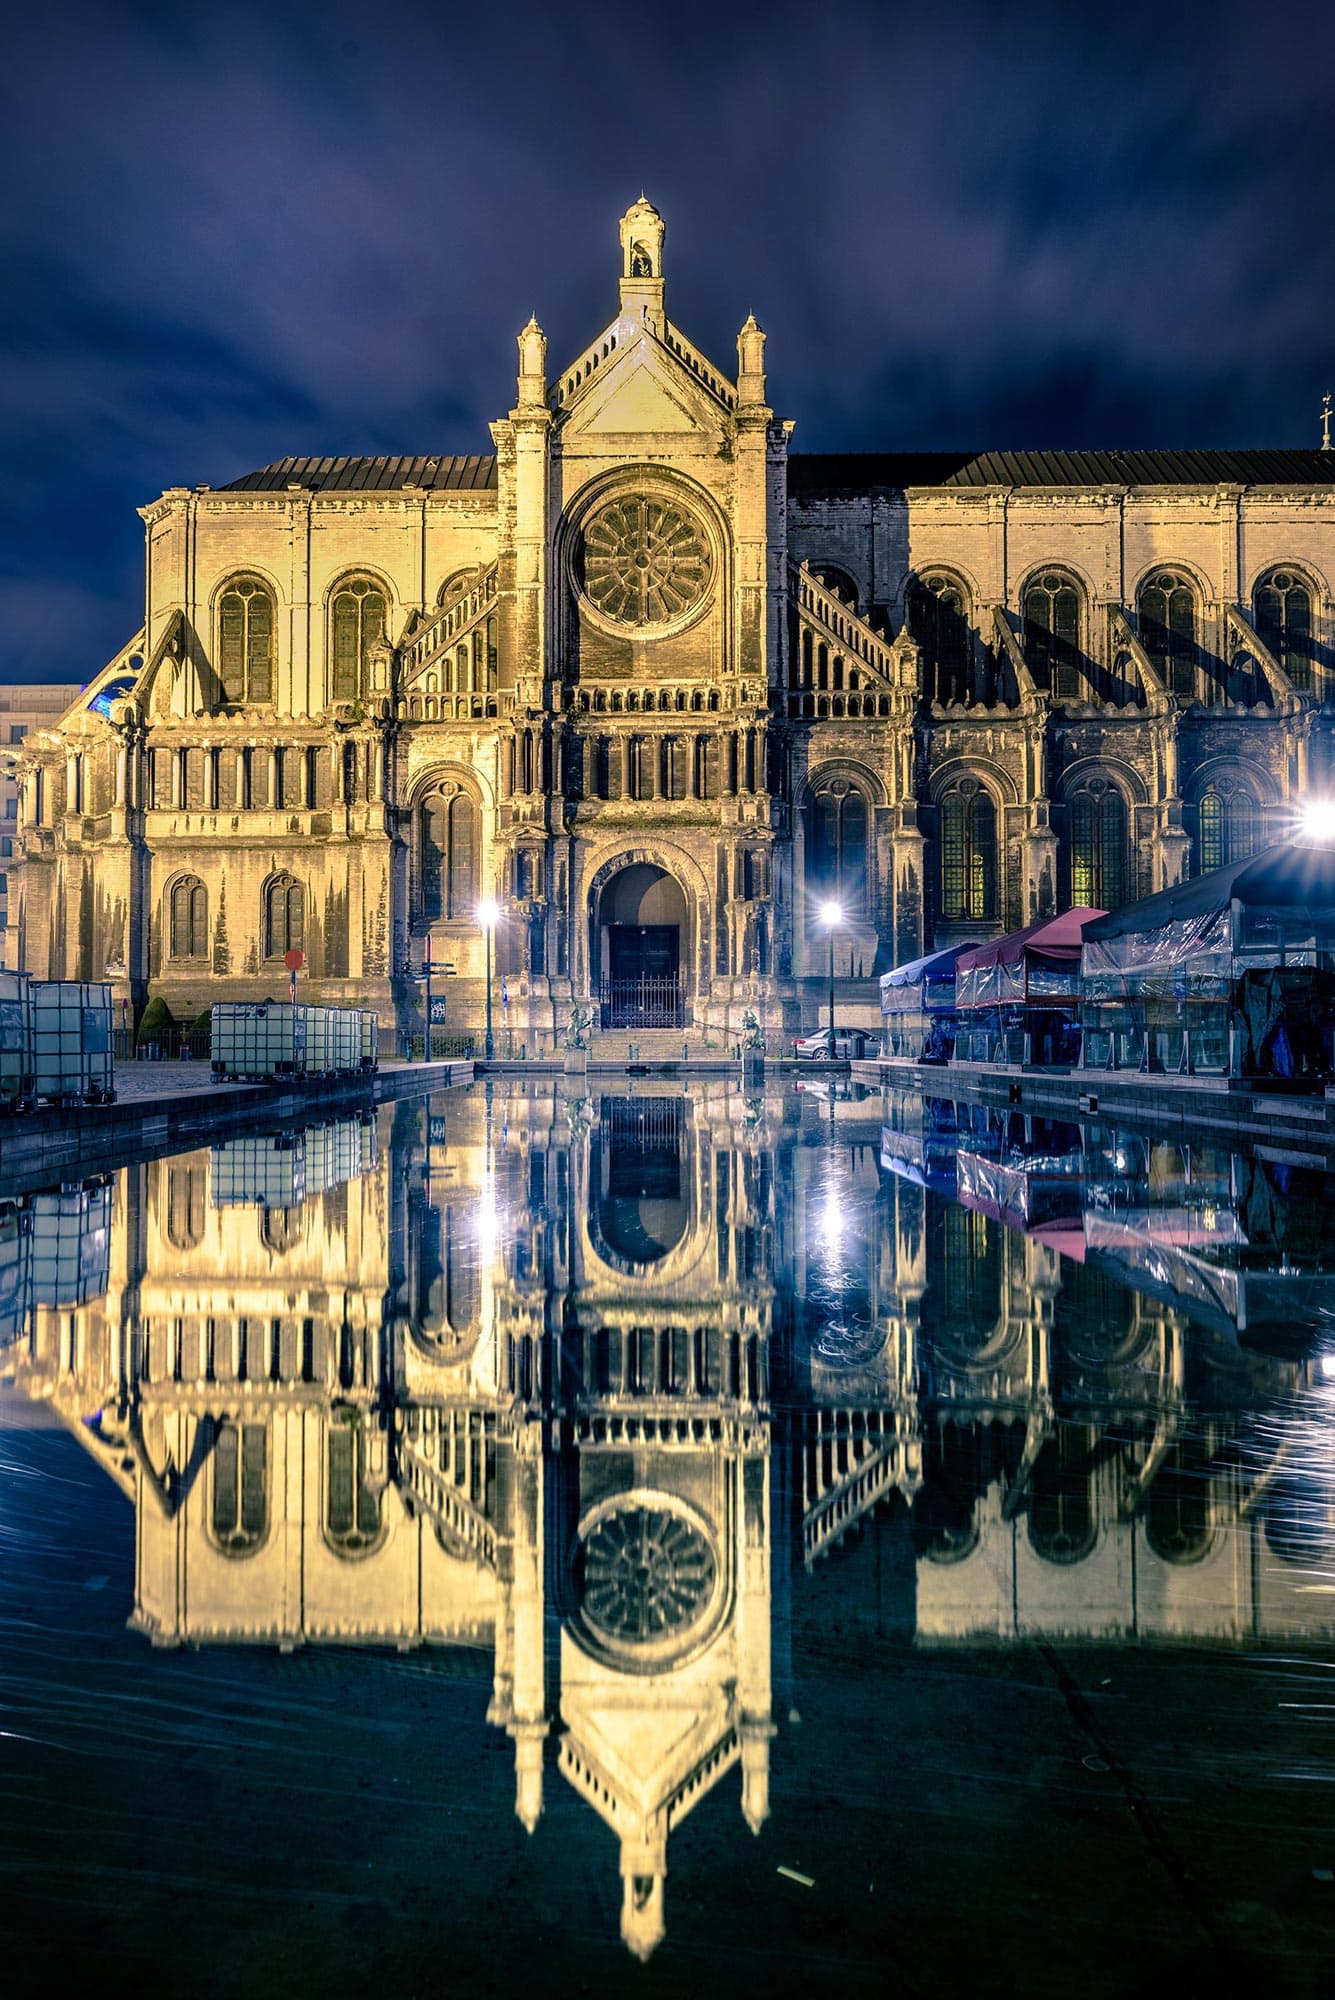 A cathedral is reflected in a pond at night.